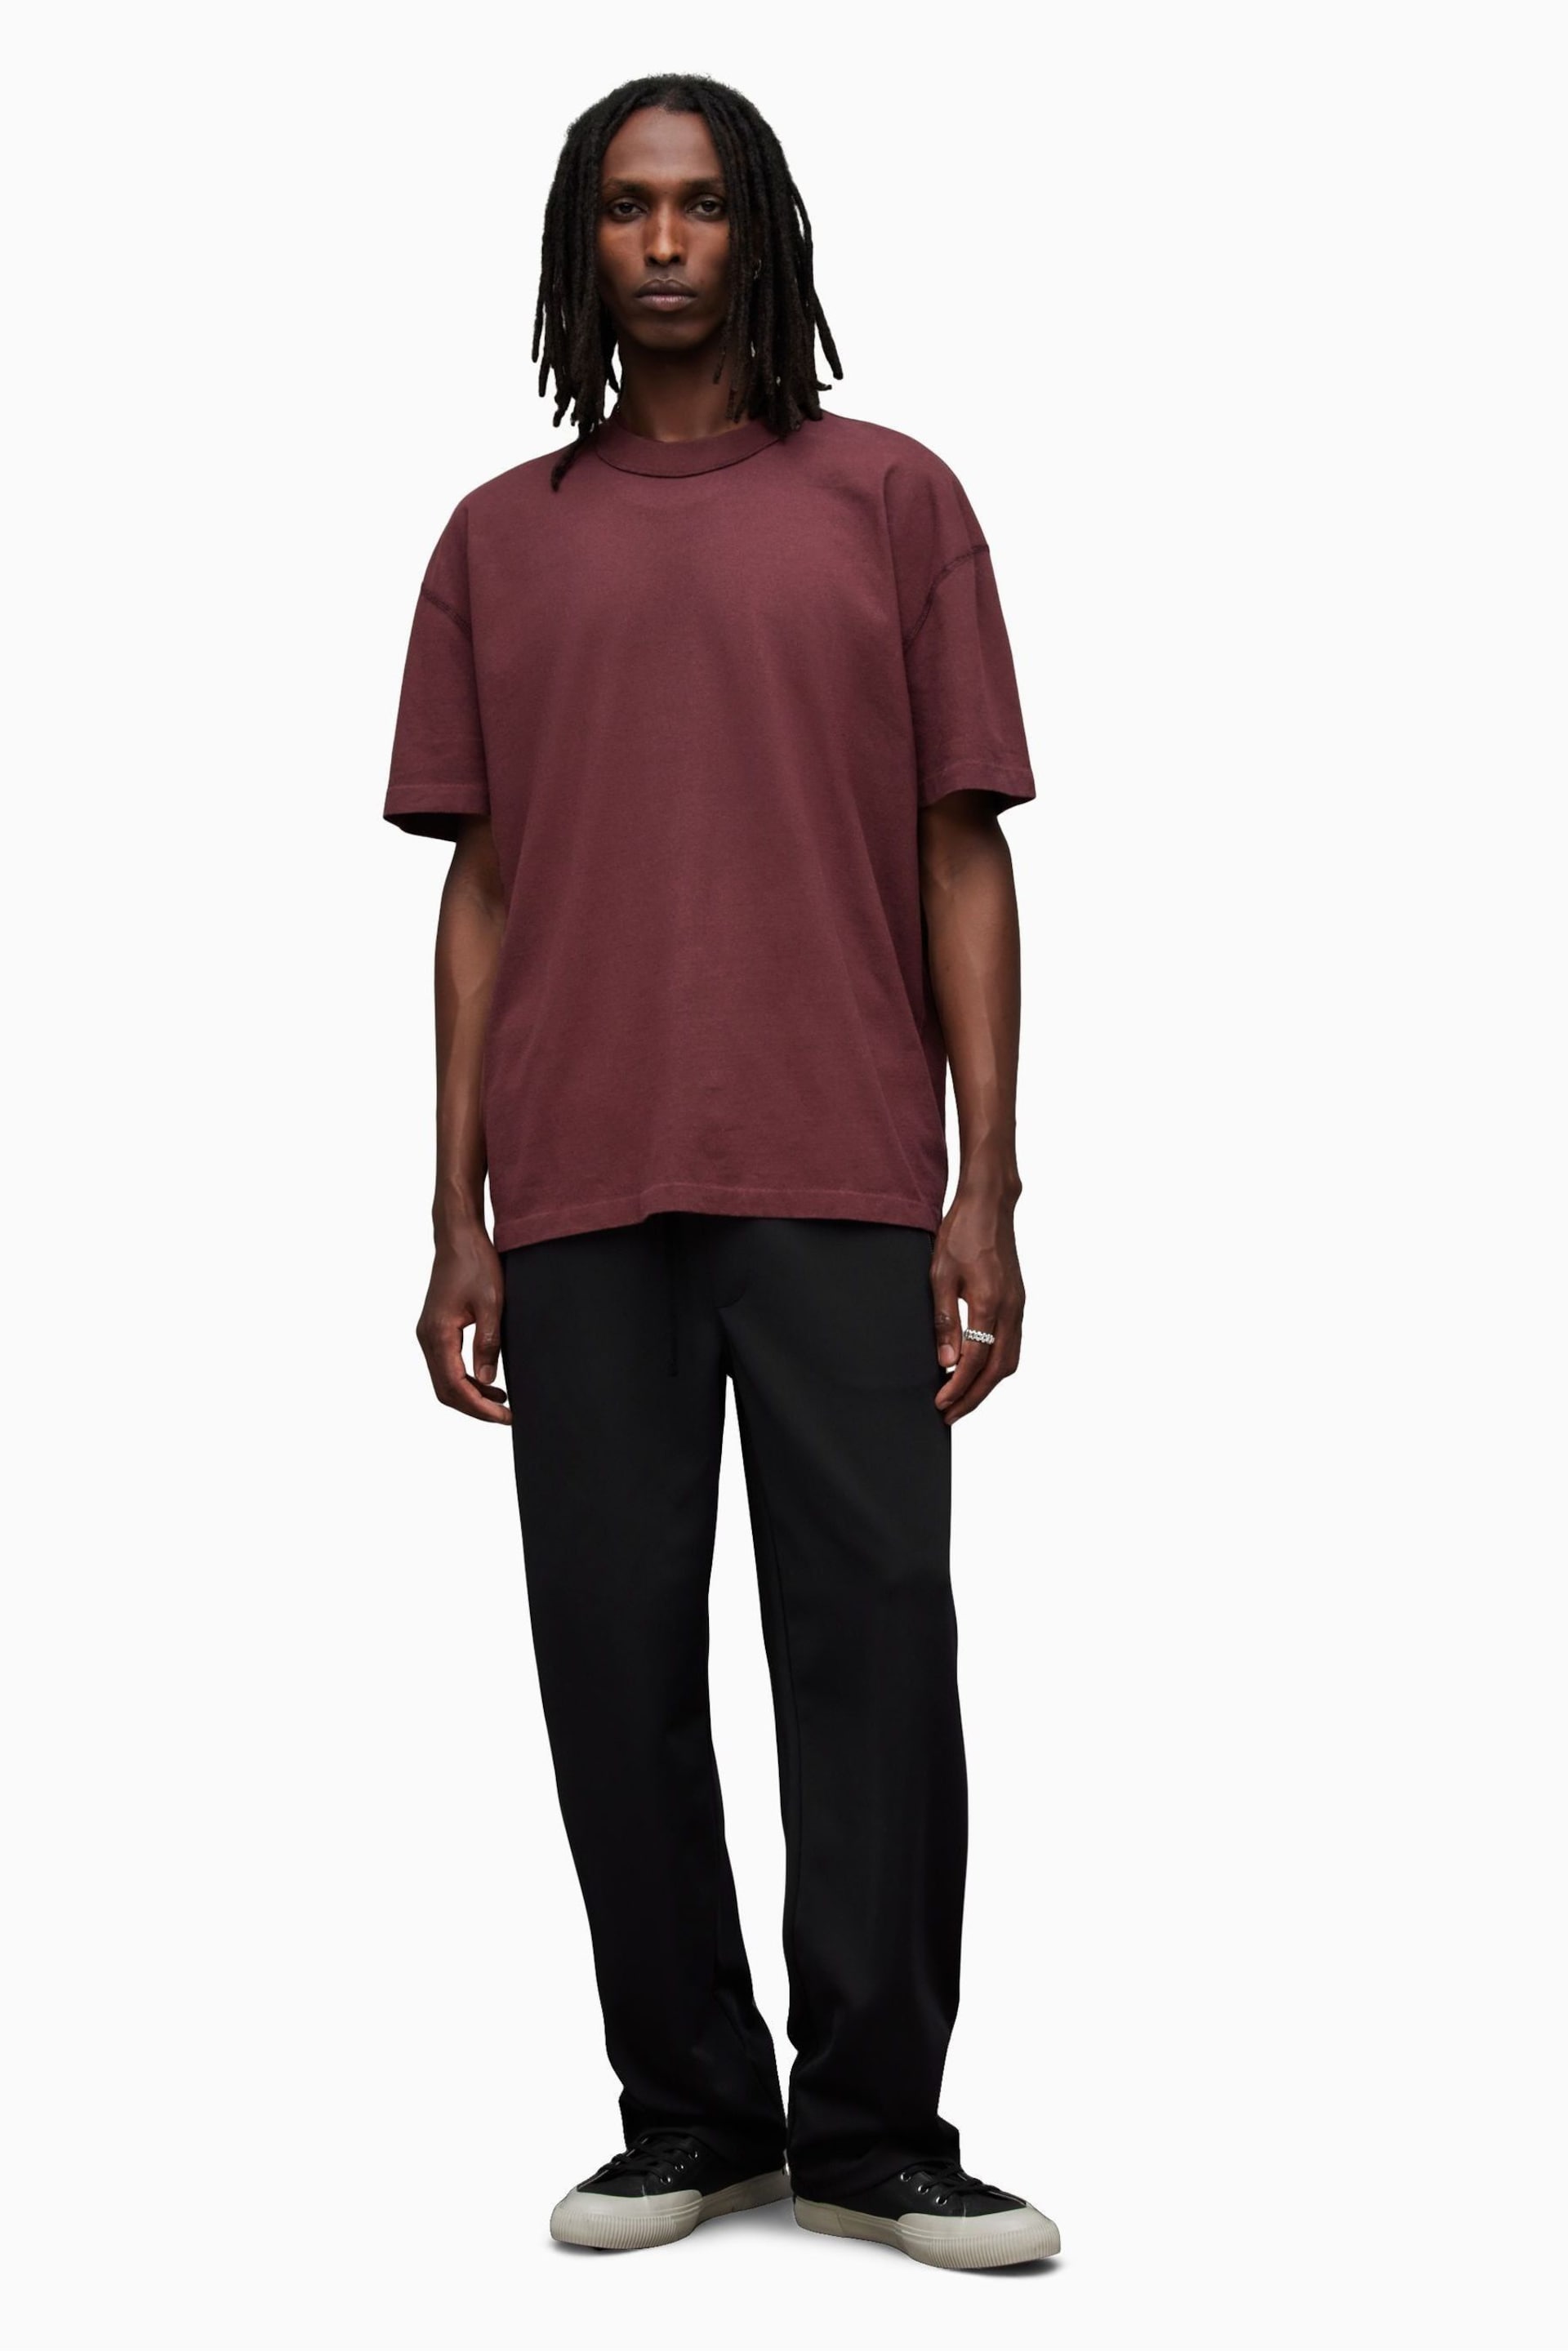 AllSaints Red Isac Short Sleeve Crew T-Shirt - Image 5 of 7